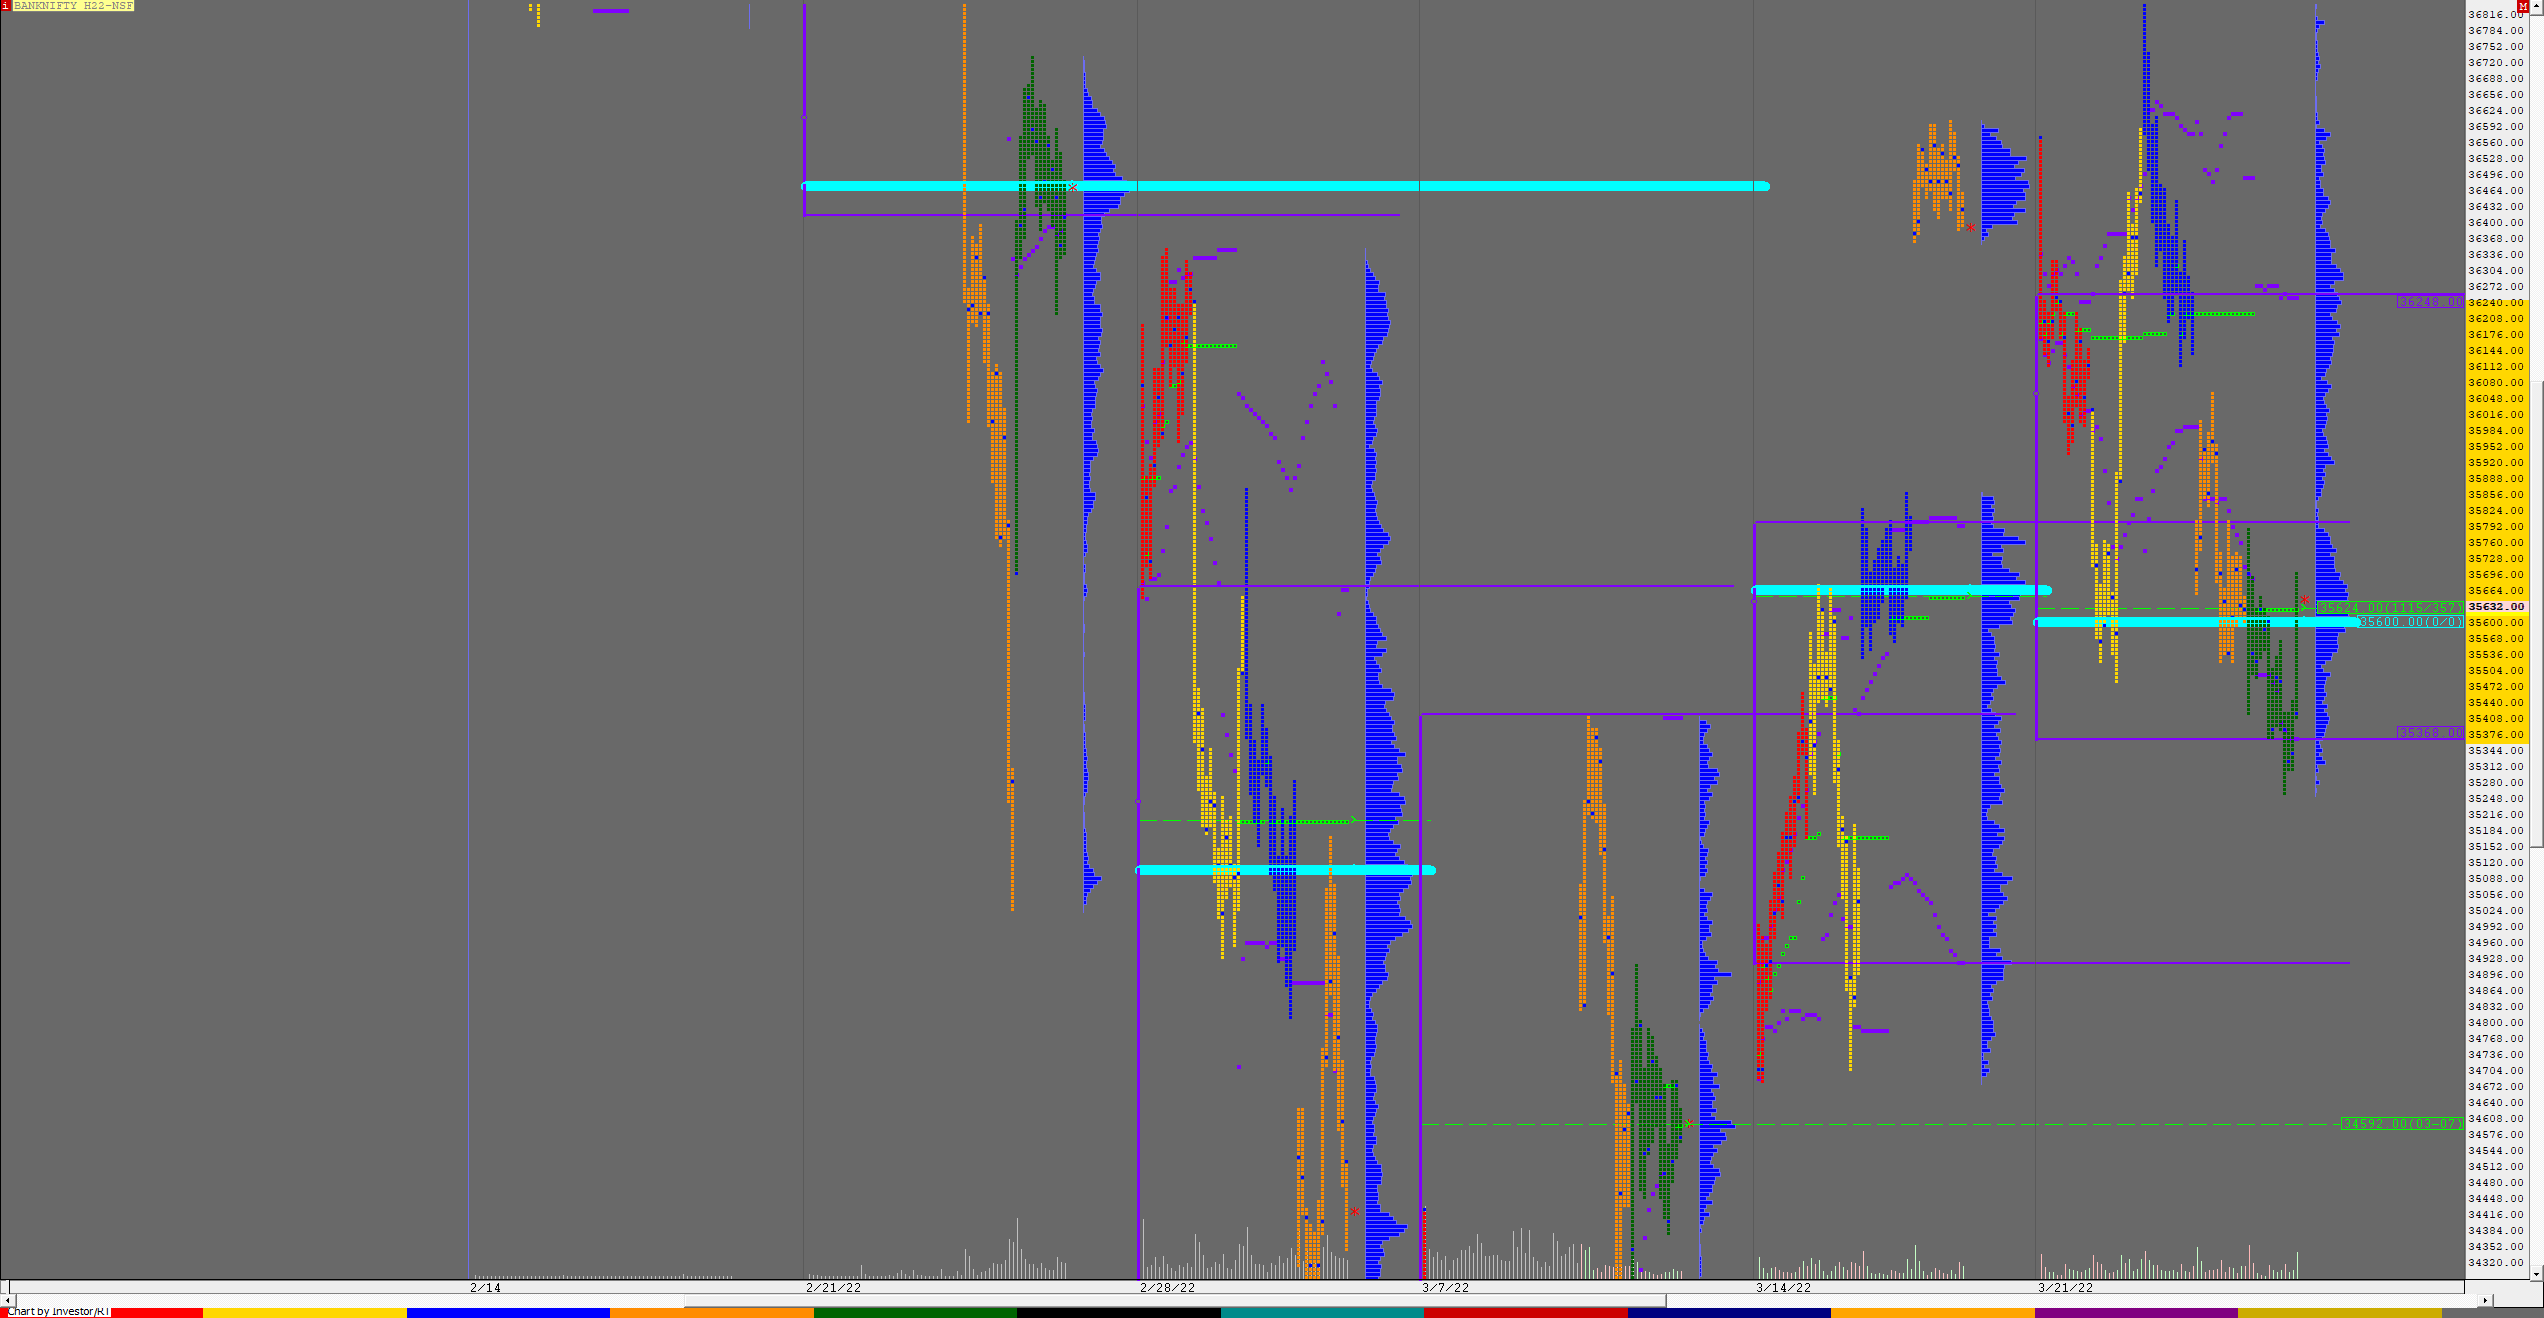 Bnf F 3 Weekly Charts (21St To 25Th Mar 2022) And Market Profile Analysis Banknifty Futures, Charts, Day Trading, Intraday Trading, Intraday Trading Strategies, Market Profile, Market Profile Trading Strategies, Nifty Futures, Order Flow Analysis, Support And Resistance, Technical Analysis, Trading Strategies, Volume Profile Trading